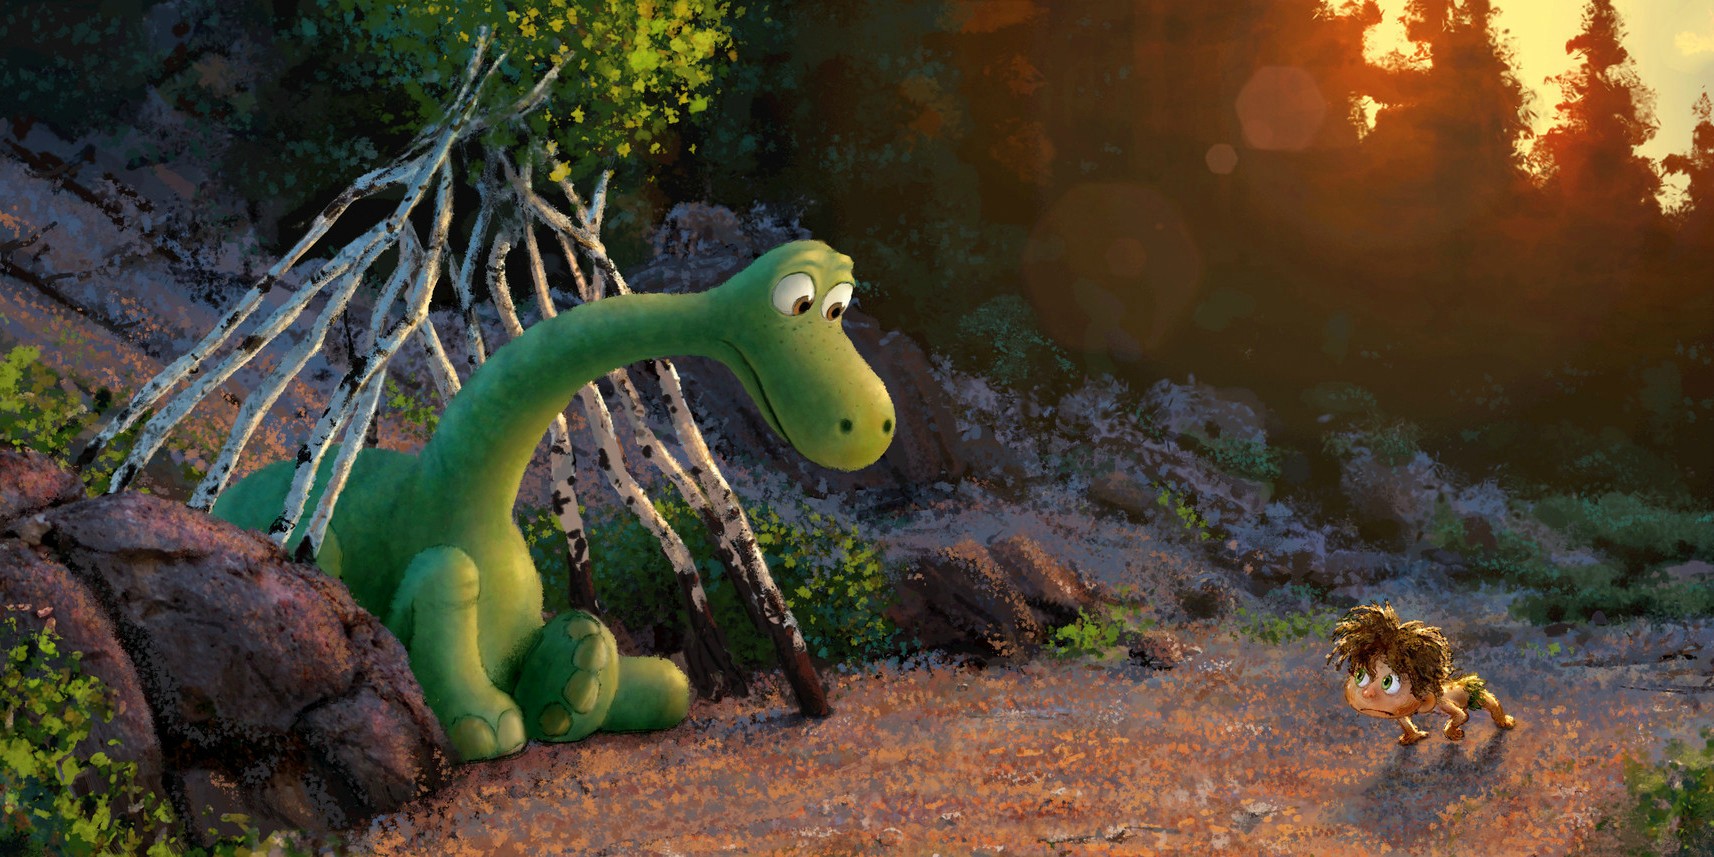 The Good Dinosaur - "The Good Dinosaur148" asks the generations-old question: What if the cataclysmic asteroid that forever changed life on Earth actually missed the planet completely and giant dinosaurs never became extinct? The film is a humorous and exciting original story about Arlo, a lively 70-foot-tall teenage Apatosaurus with a big heart. After a traumatic event rattles Arlo146's tranquil community, he sets out on a quest to restore peace, gaining an unlikely companion along the way - 151a young human boy named Spot. Release date: November 25th